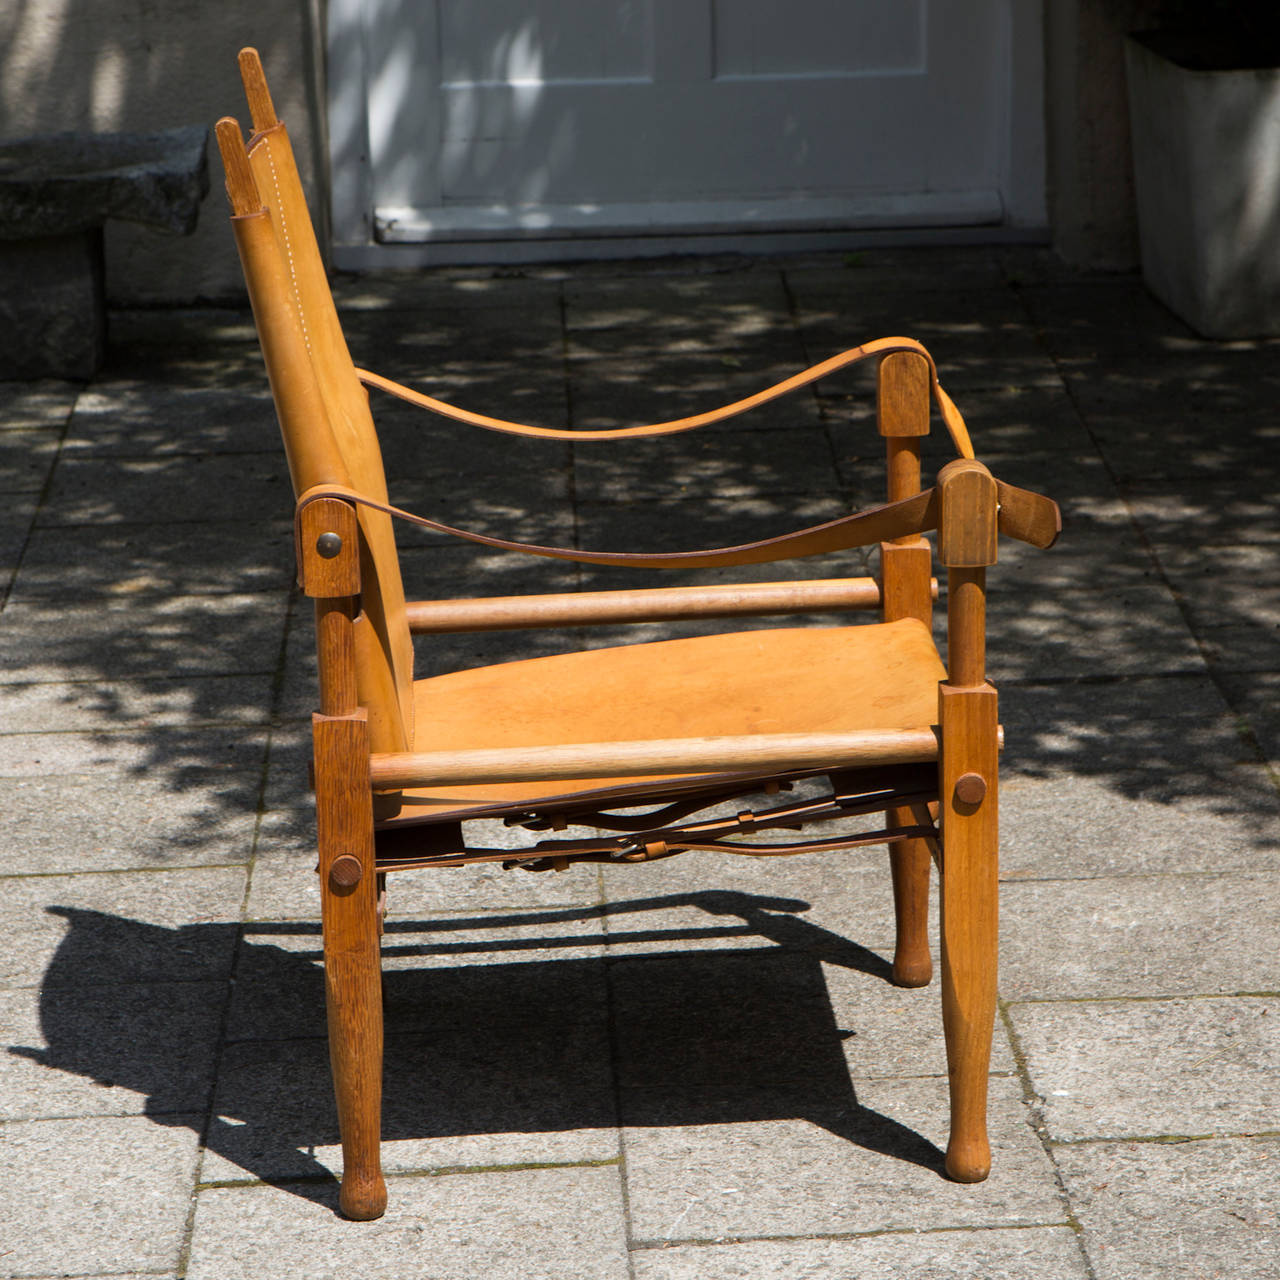 Safari chair designed by Wilhelm Kienzle for Wohnbedarf Zurich, Switzerland, 1928. Manufactured in the 1950s. Made of oak and brown cognac leather.